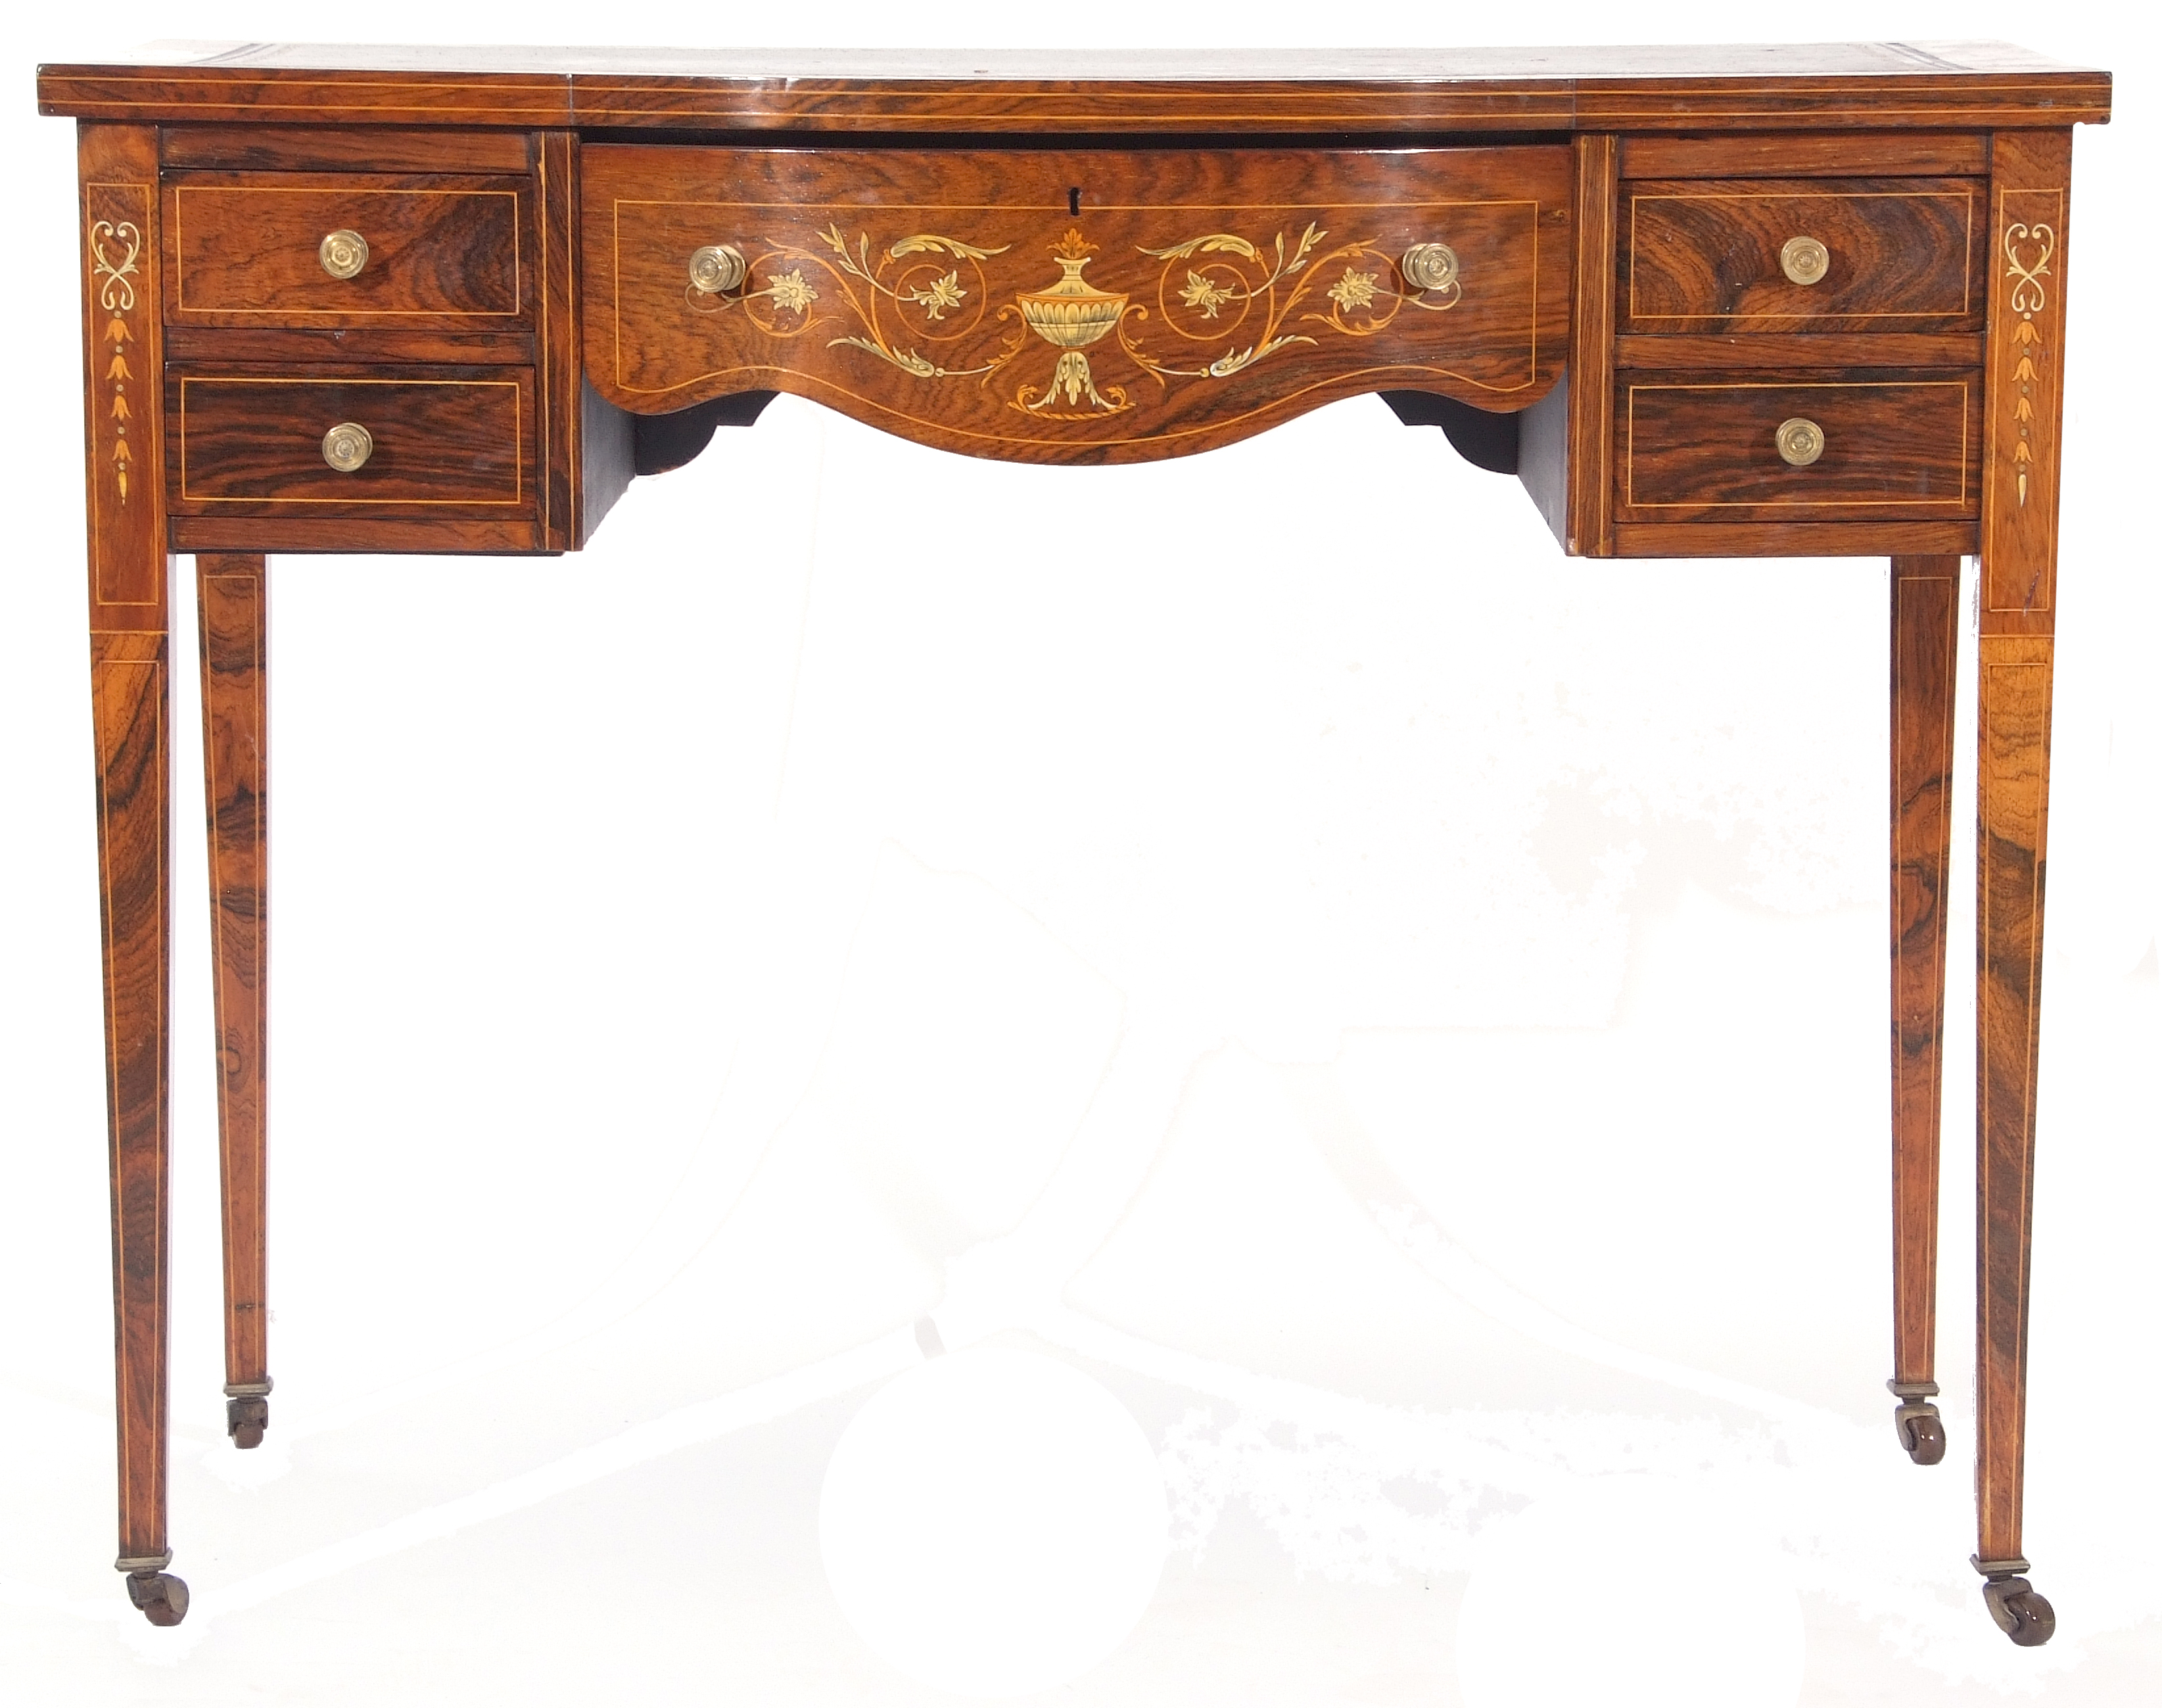 Late 19th/early 20th century ladies rosewood writing desk, the line inlaid bow fronted top with - Image 2 of 3